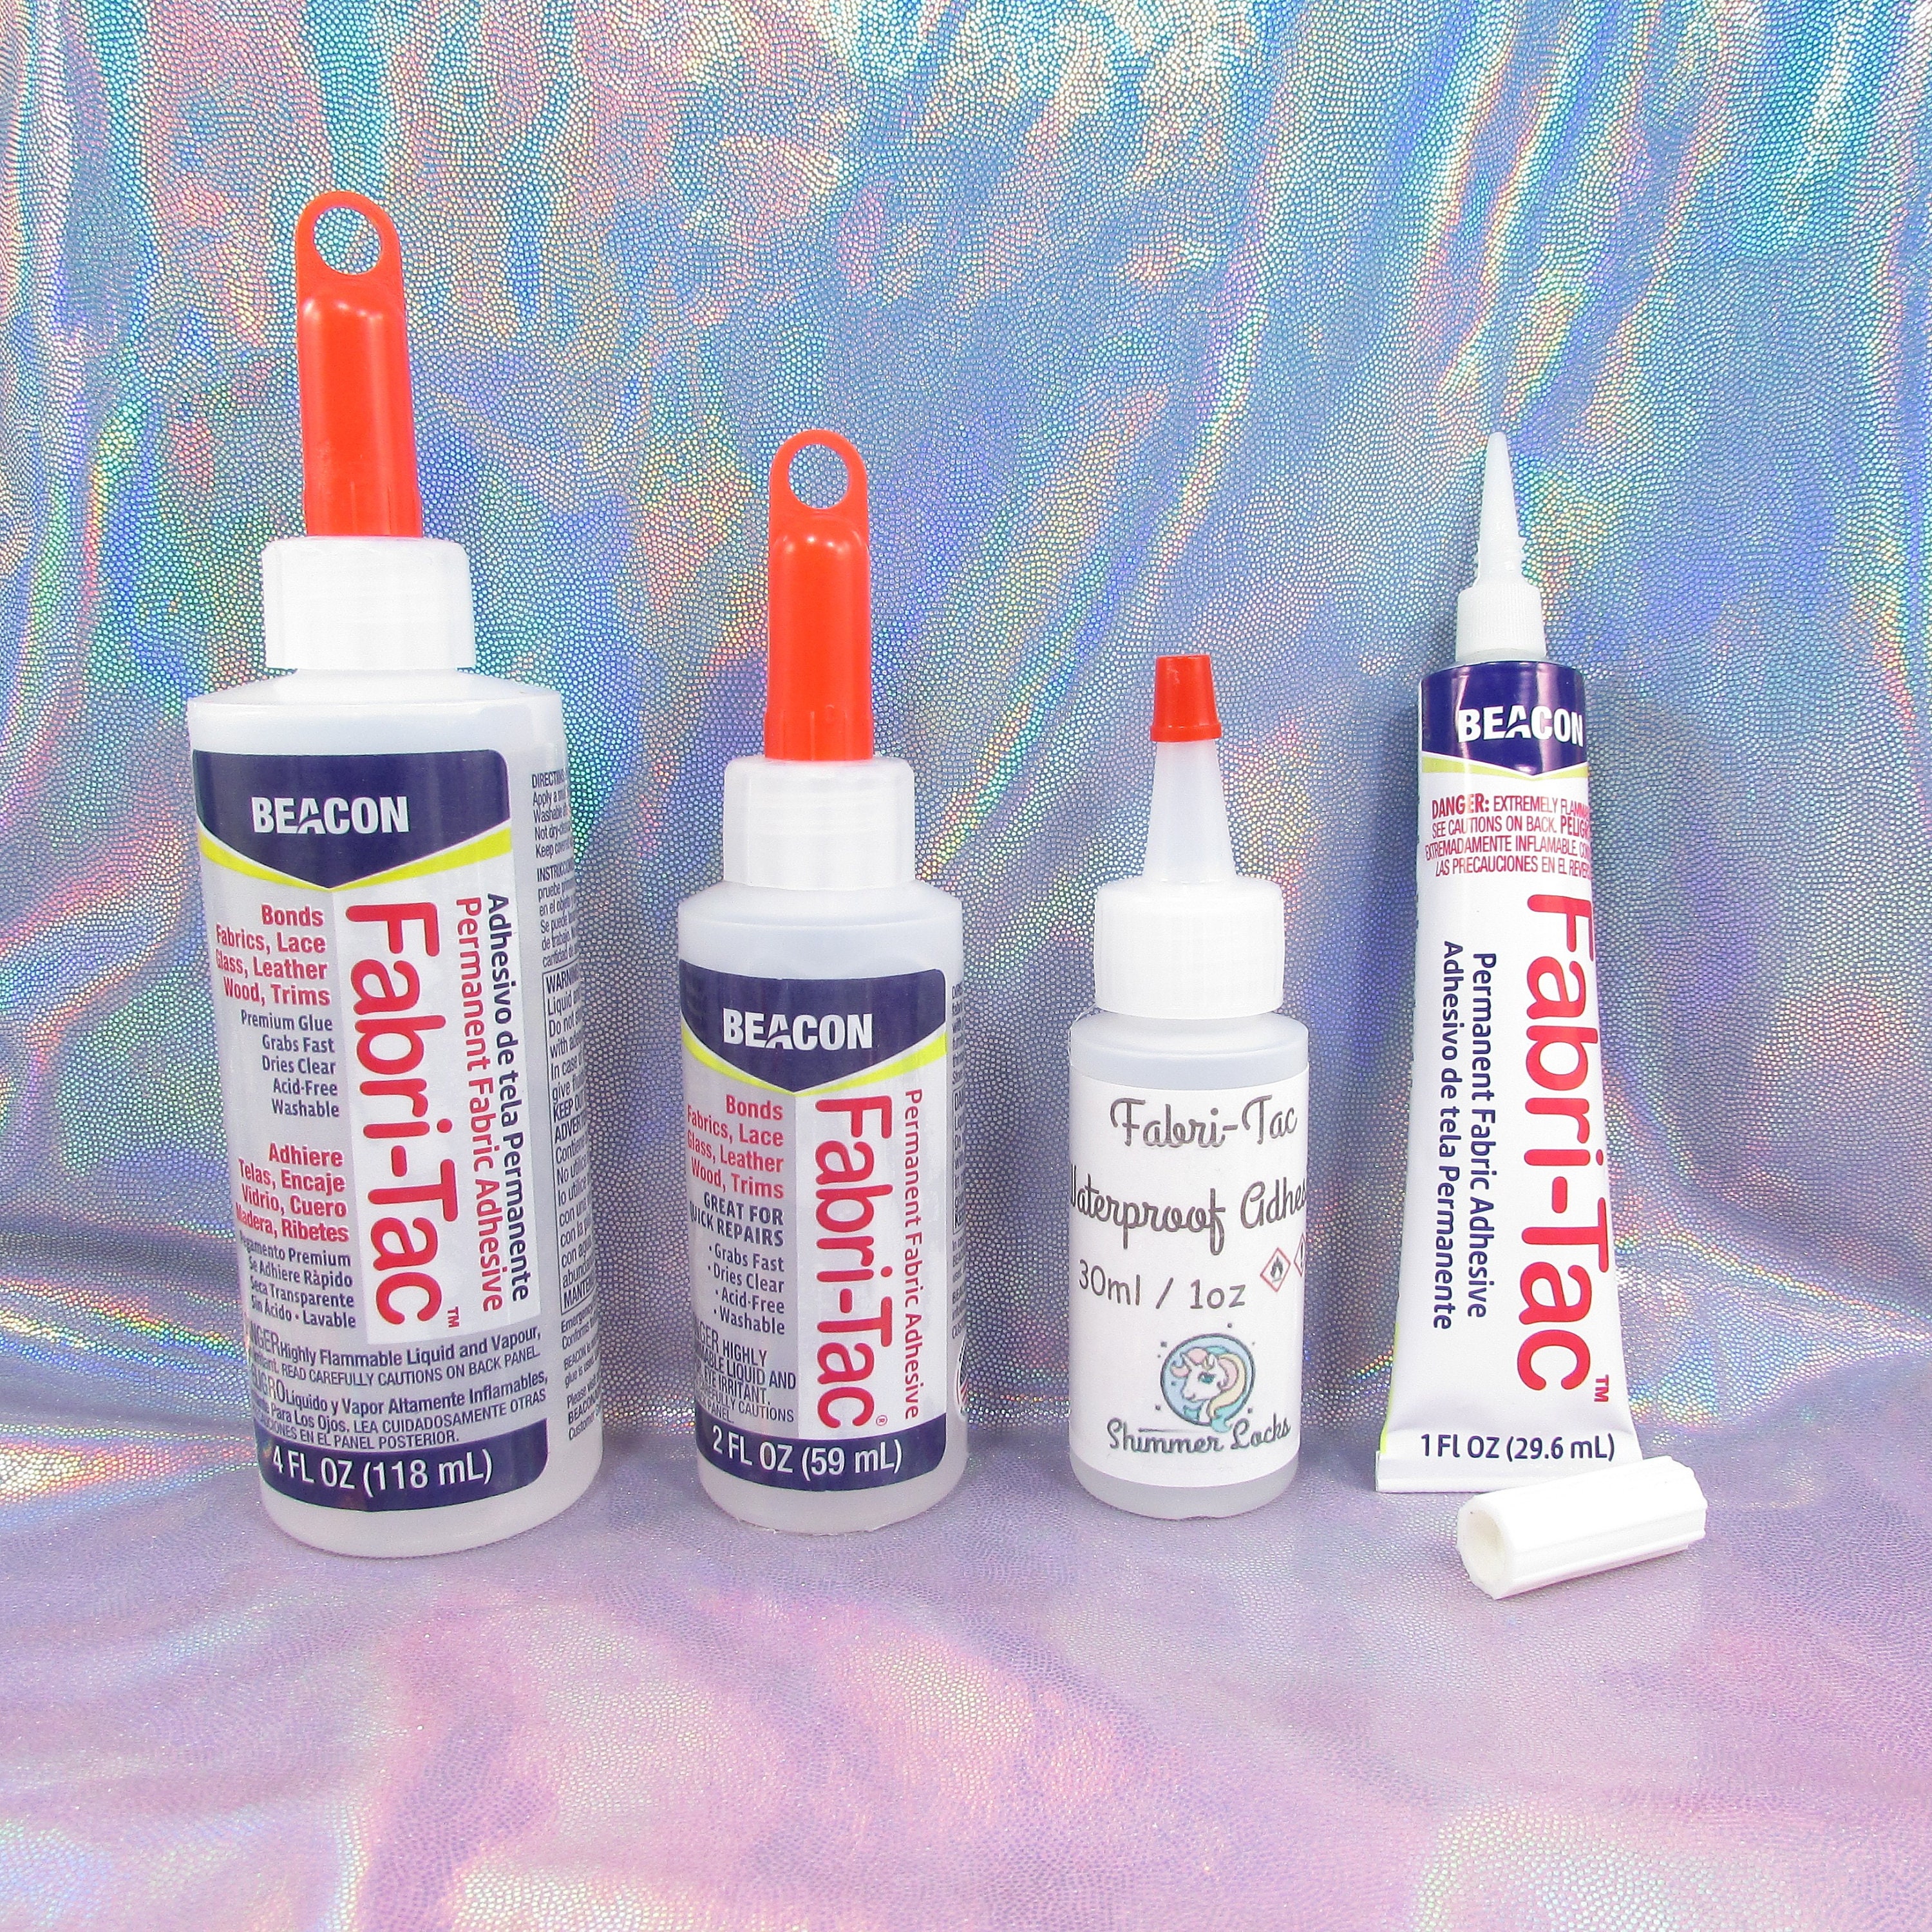 Fabri-tac Glue for Sealing Rerooted Doll Hair, Integrity, My Little